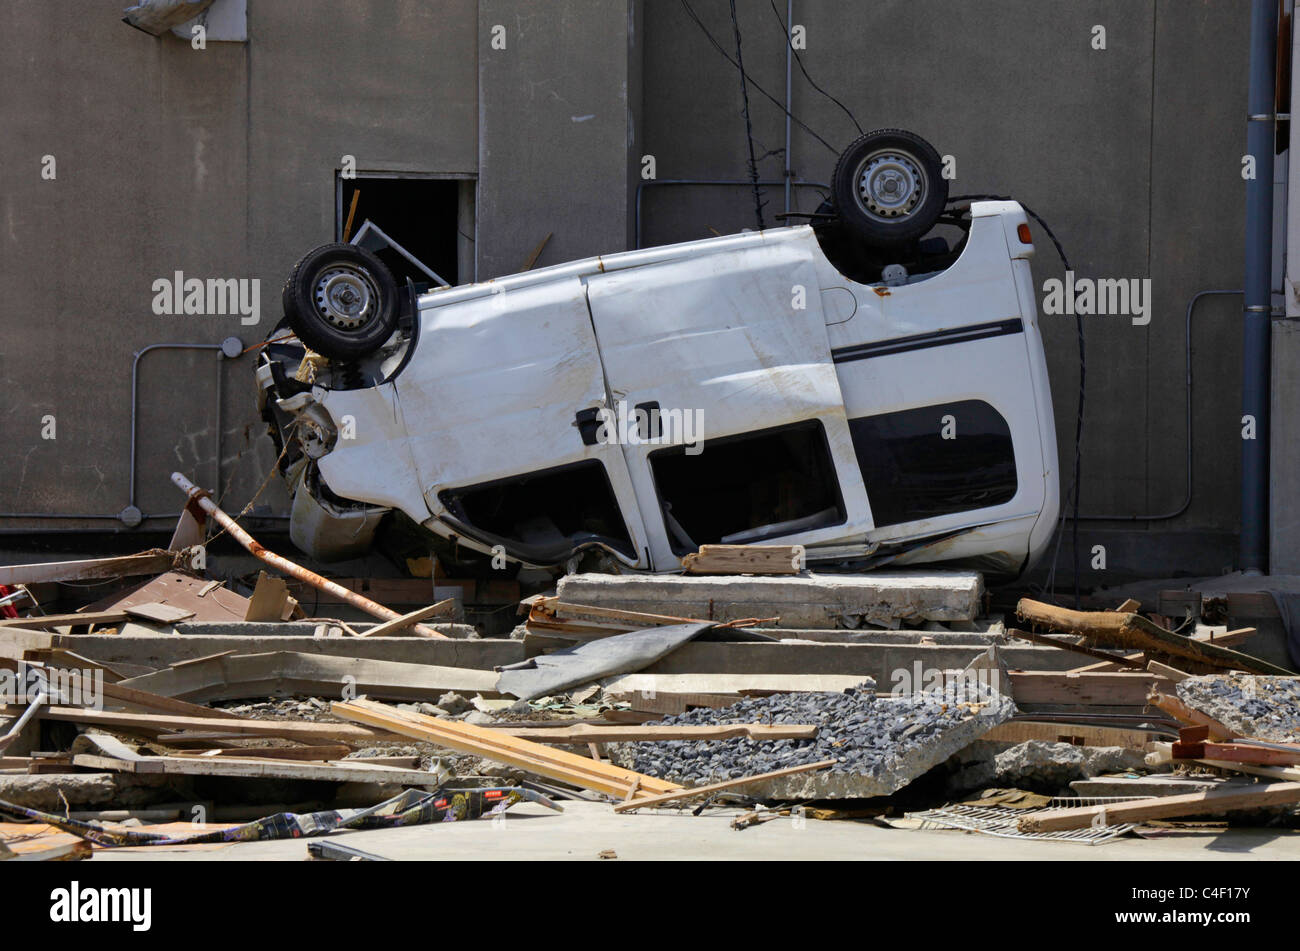 A motor car destroyed by Tsunami 11th March 2011 Stock Photo